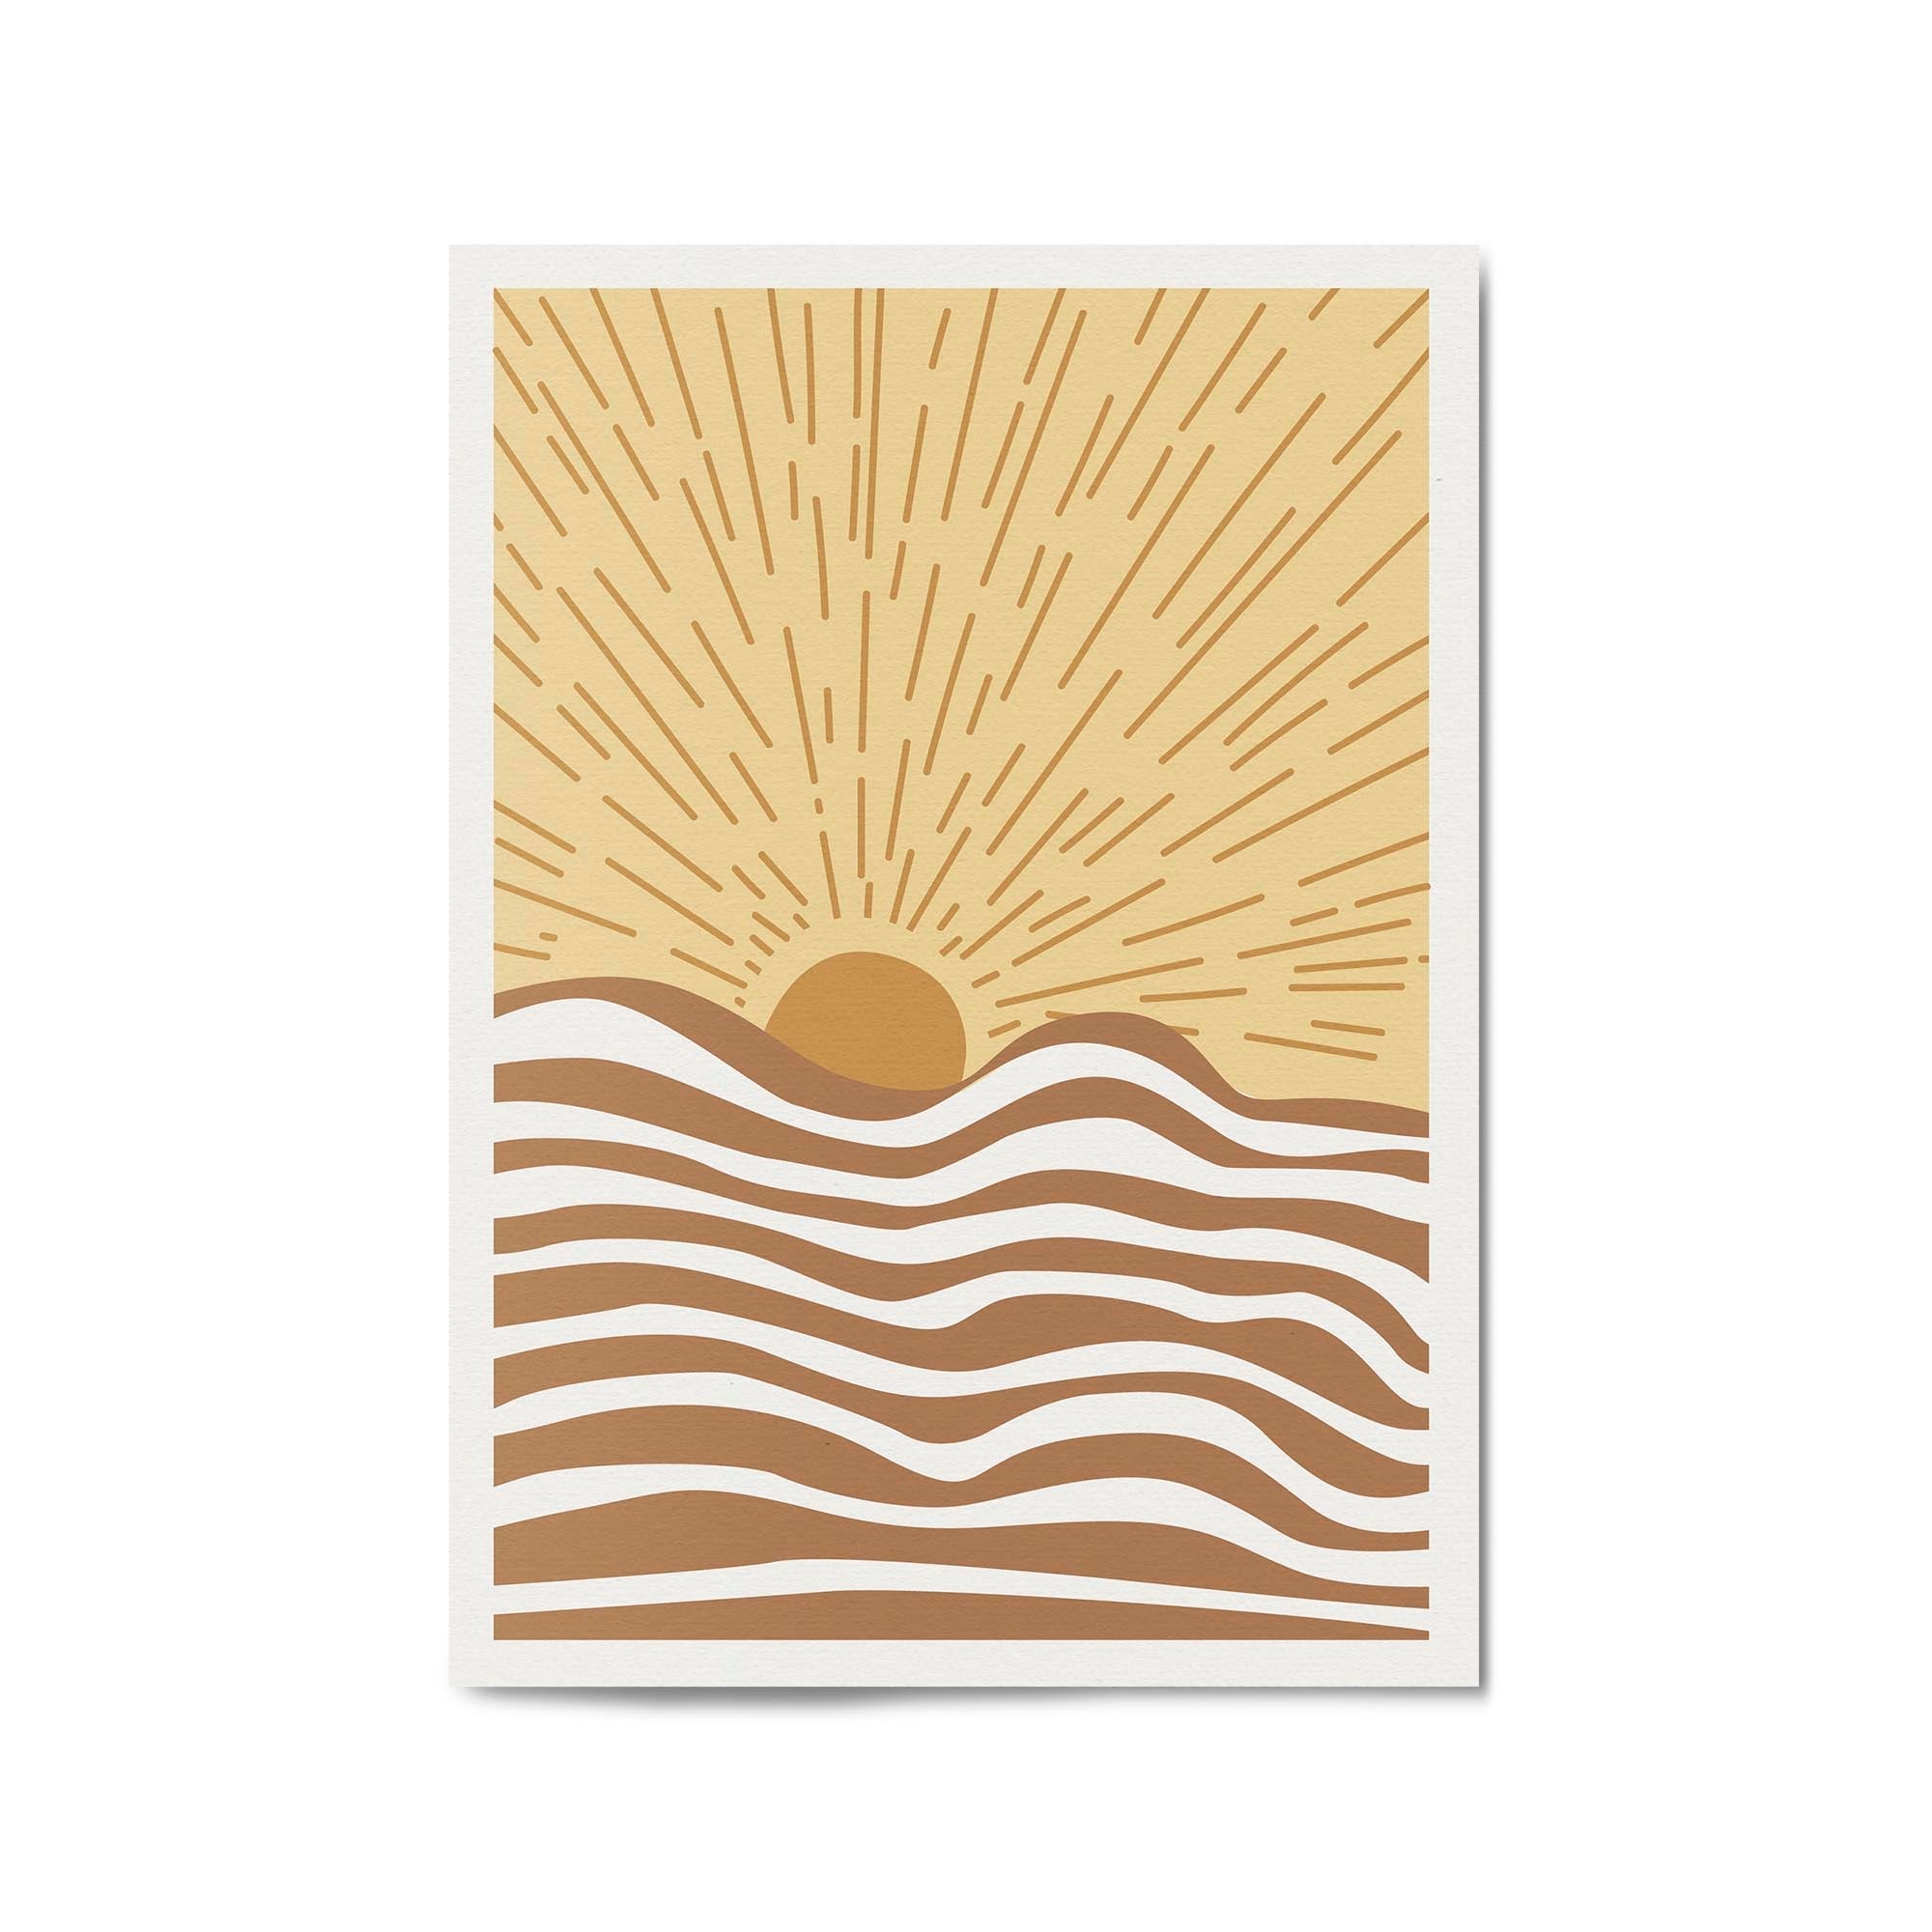 A New Day Sunset Minimal Abstract Wall Art